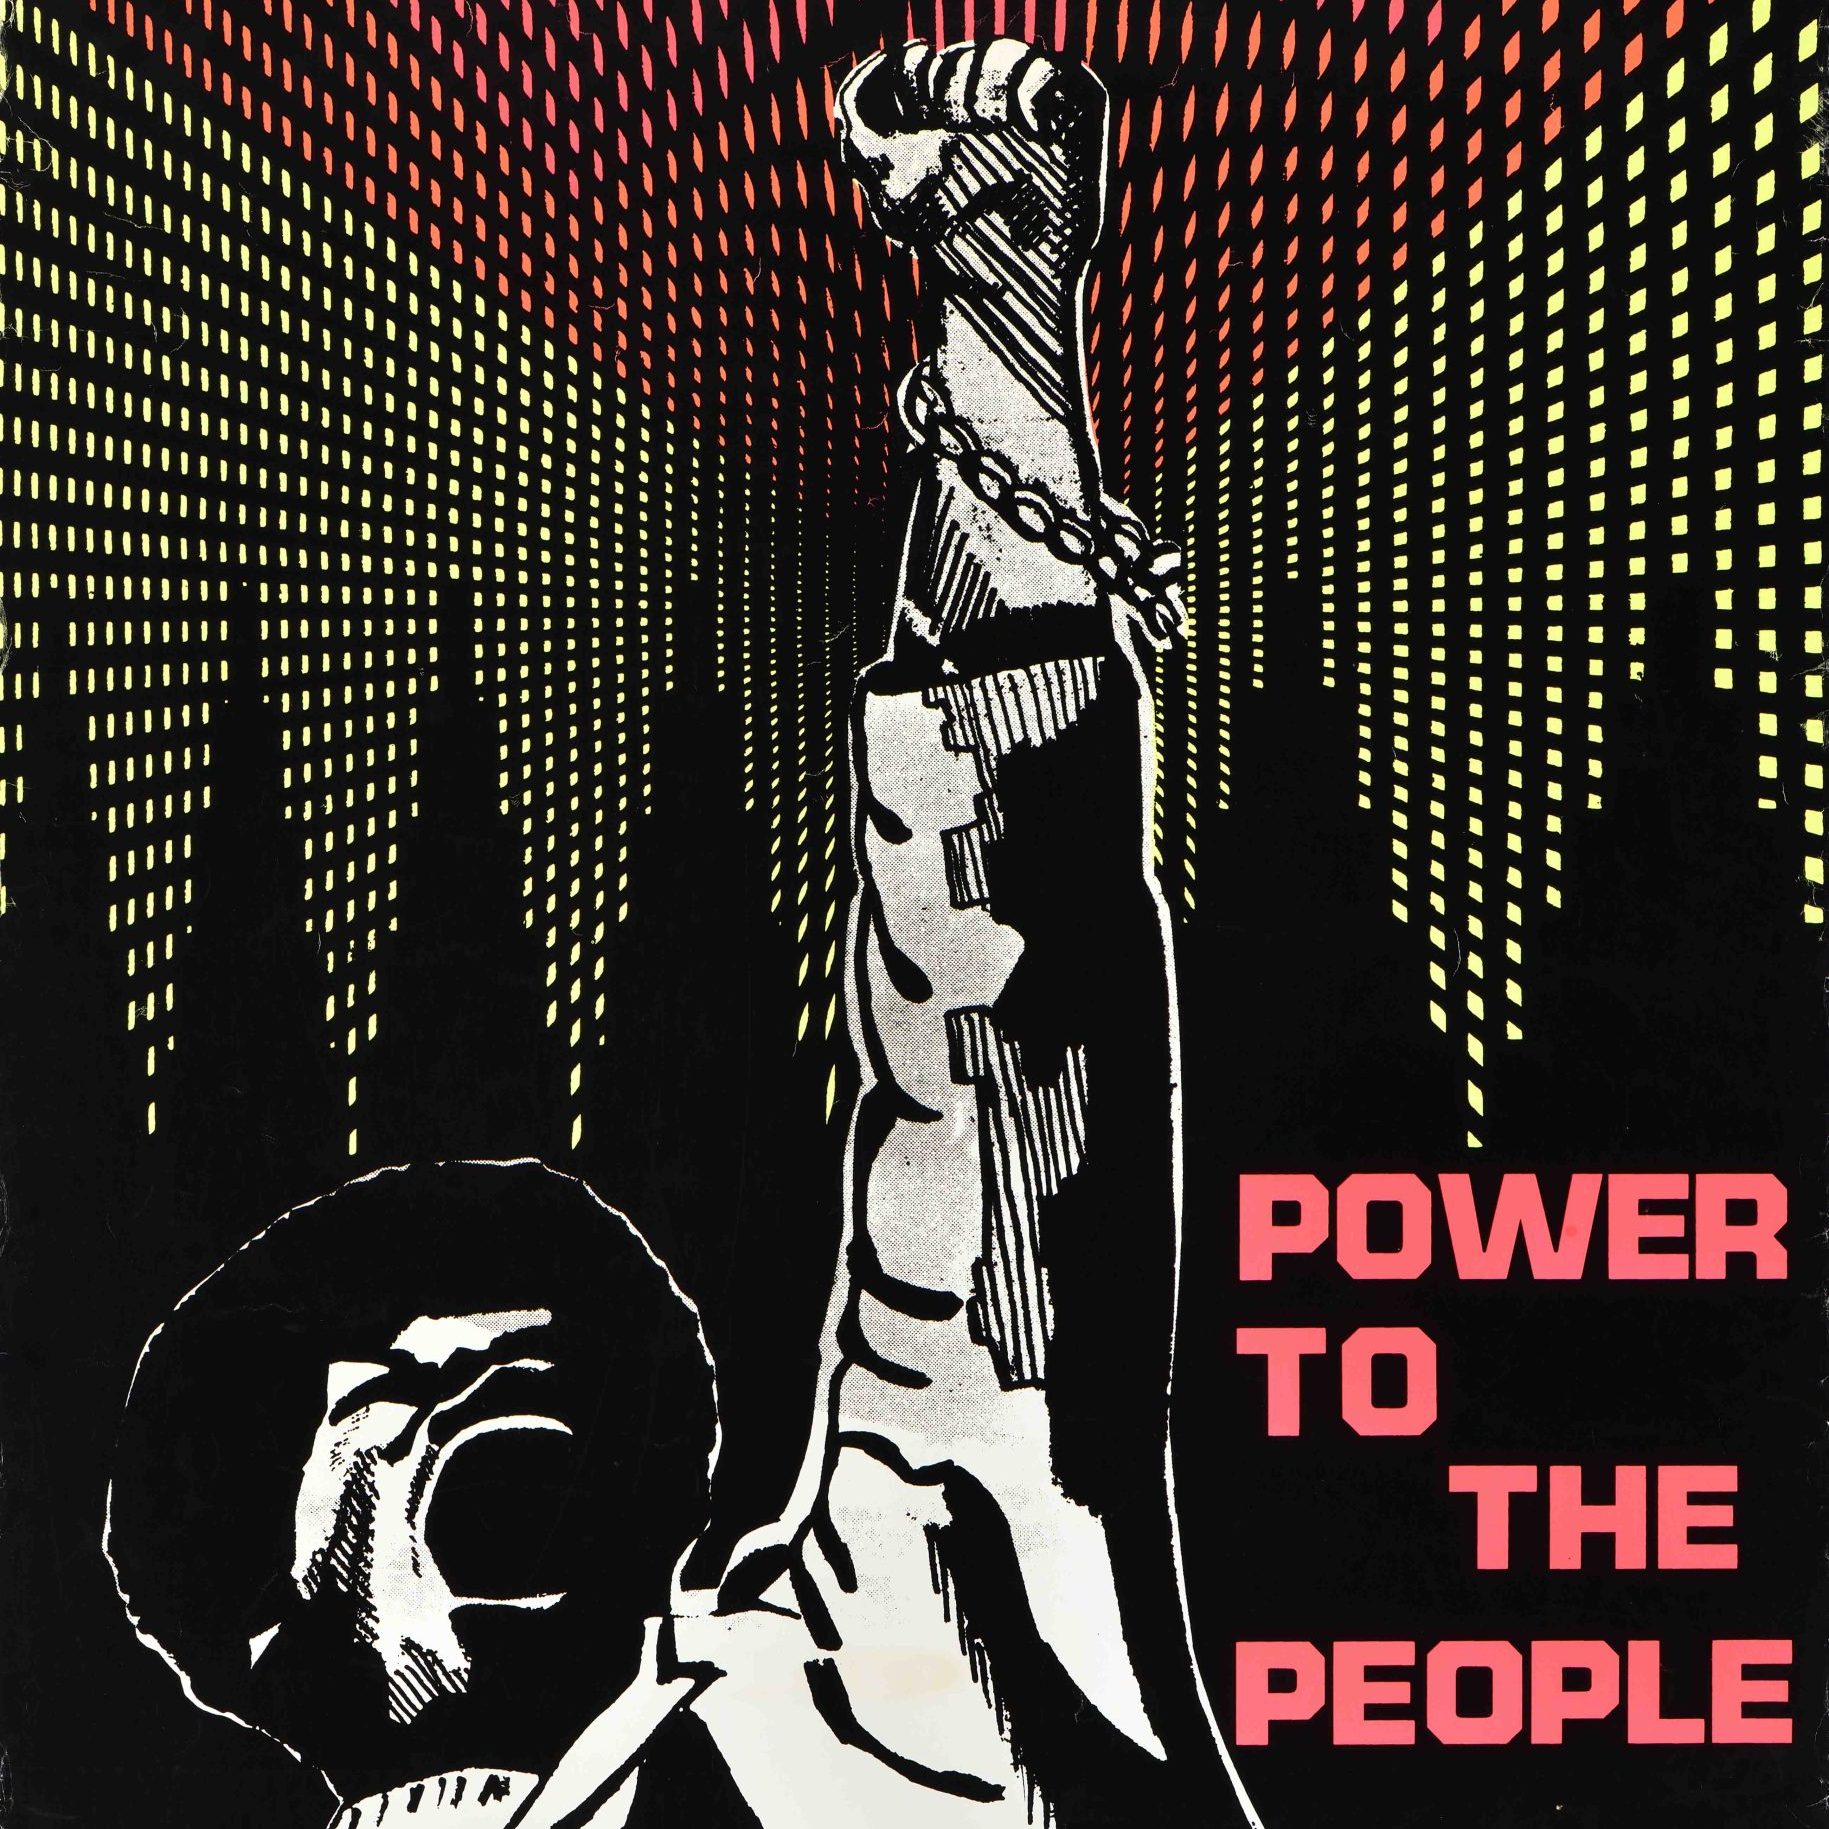 silkscreen poster of a black figure holding a raised fist against the backdrop of a city